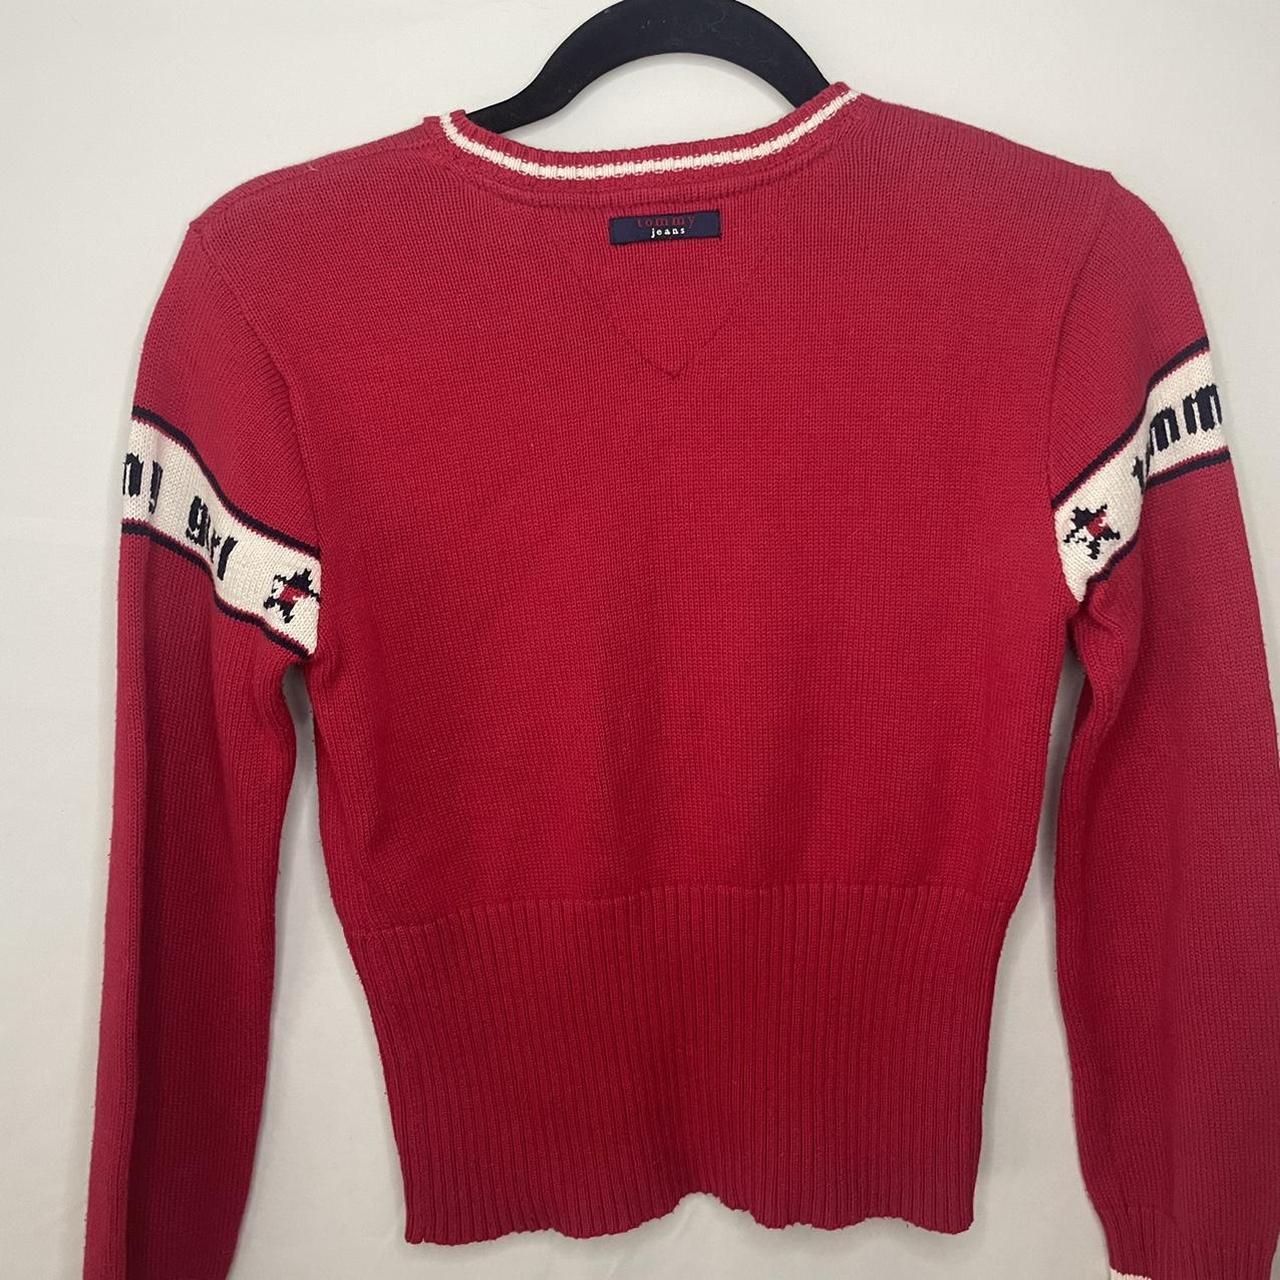 Product Image 3 - Tommy girl sweater, vintage 90s,